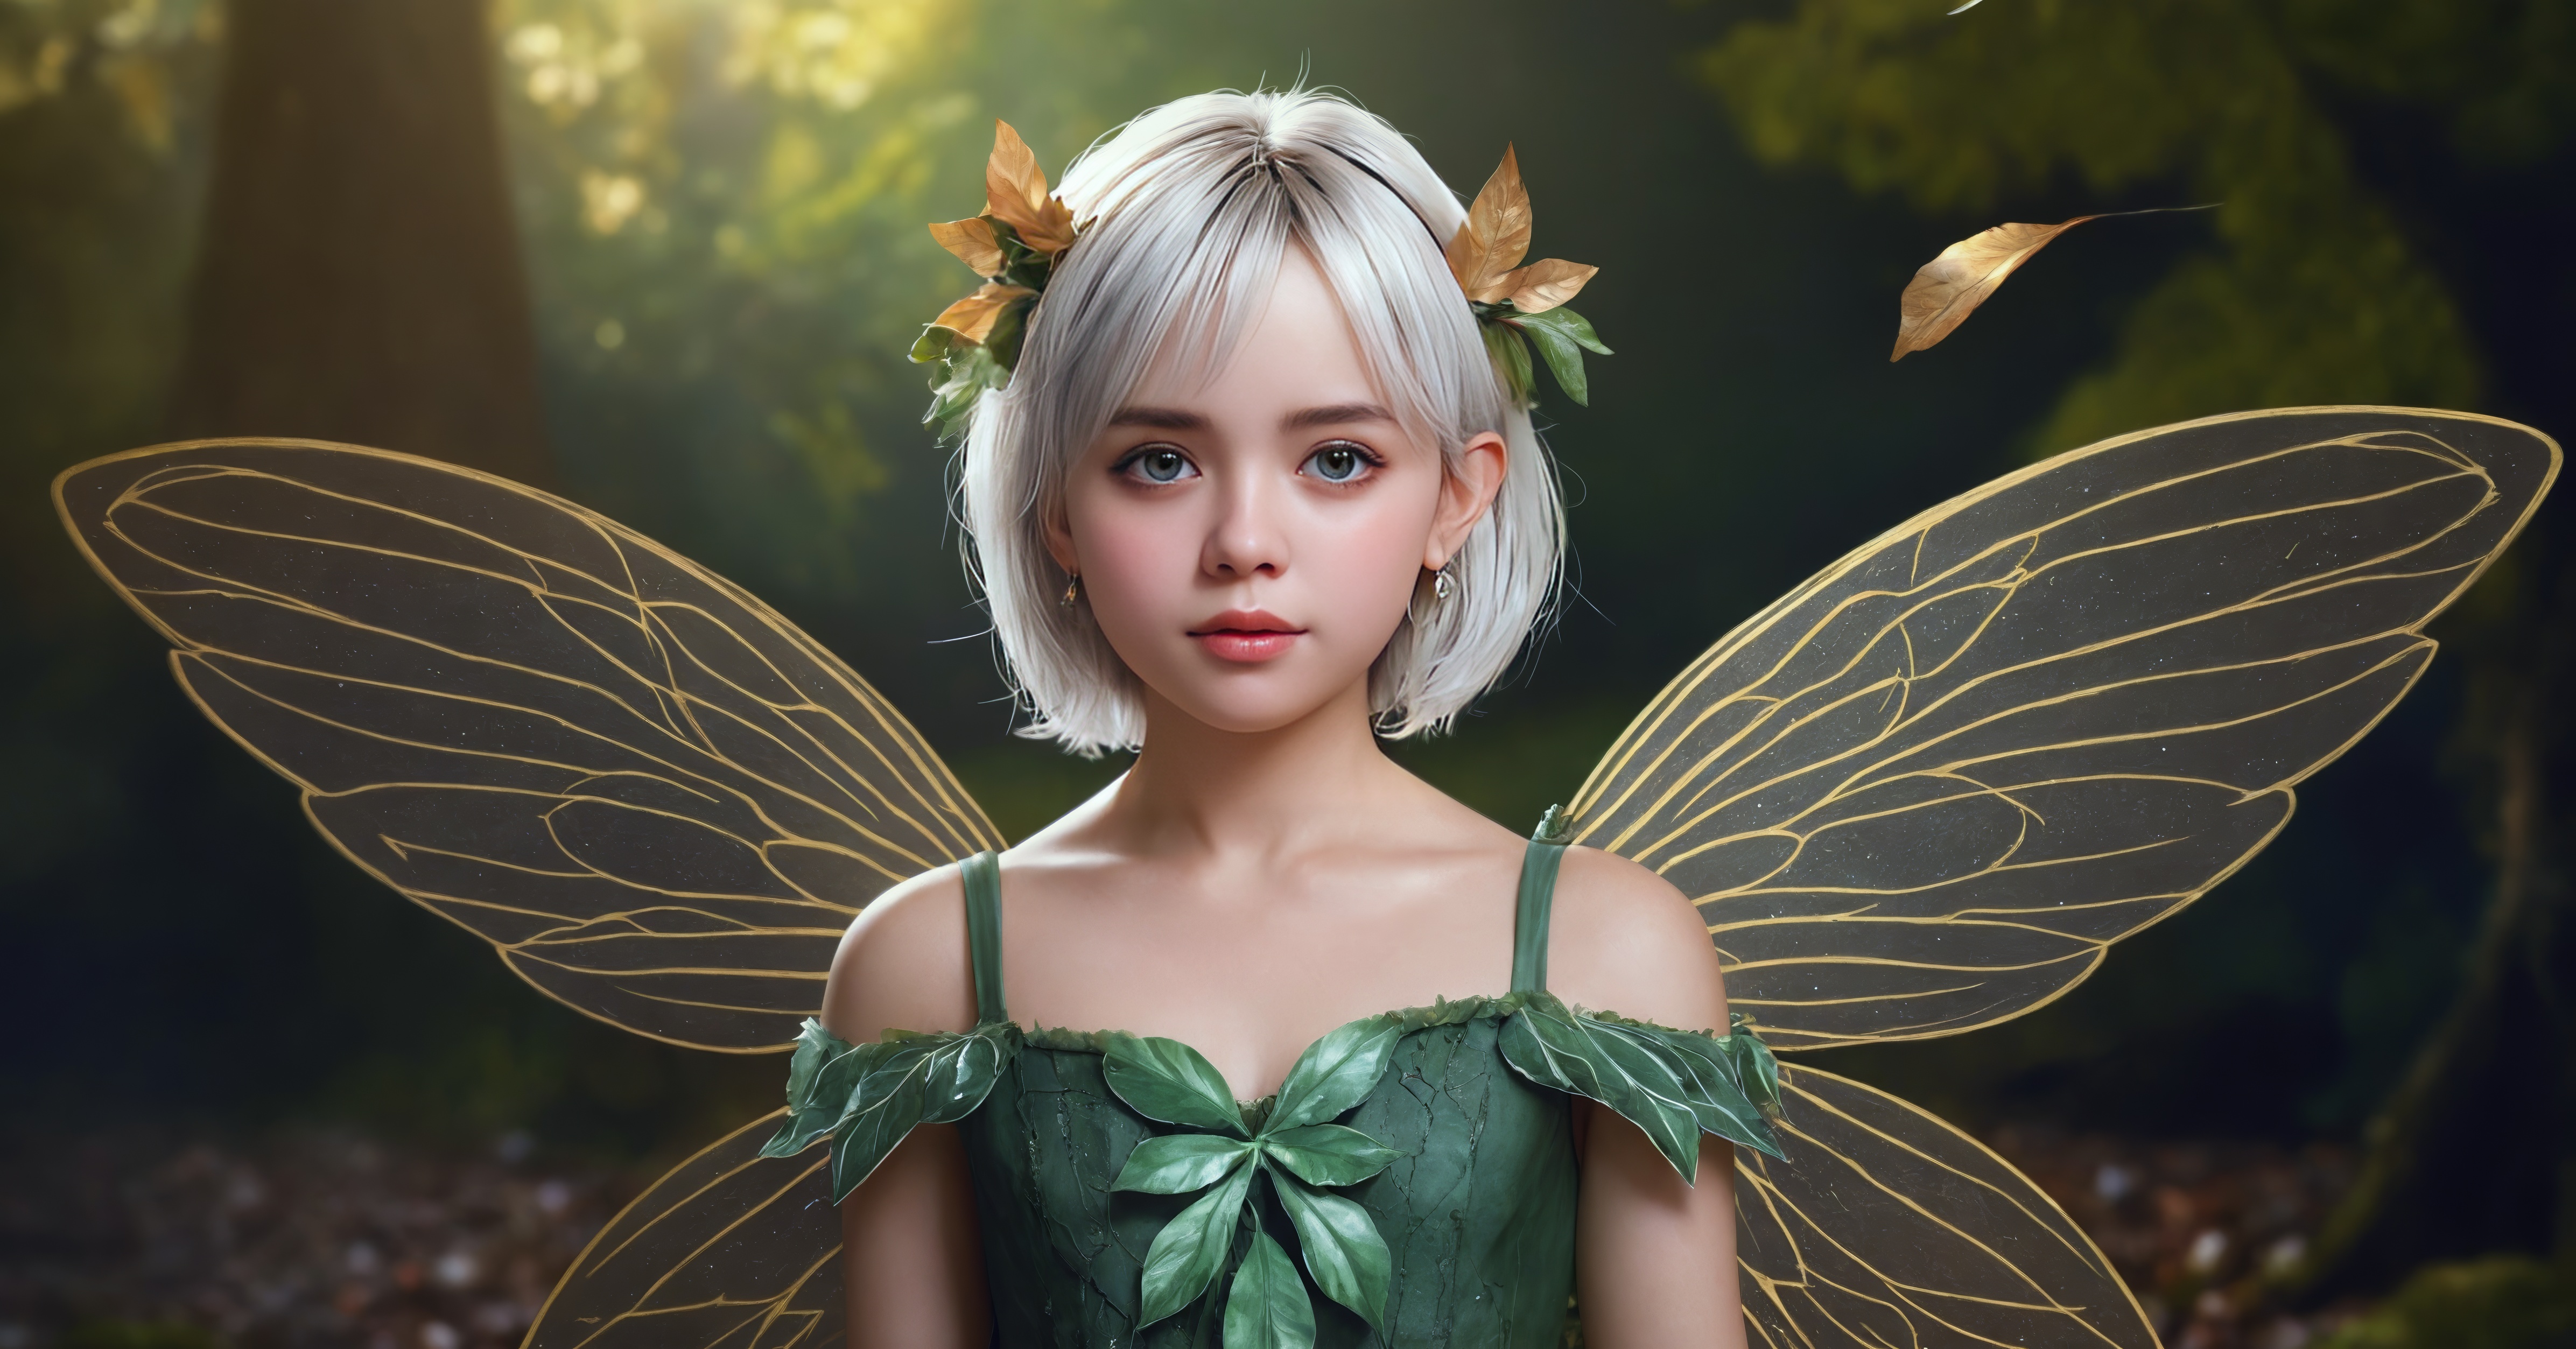 Free photo A young girl with white hair and an outfit made from fairy leaves